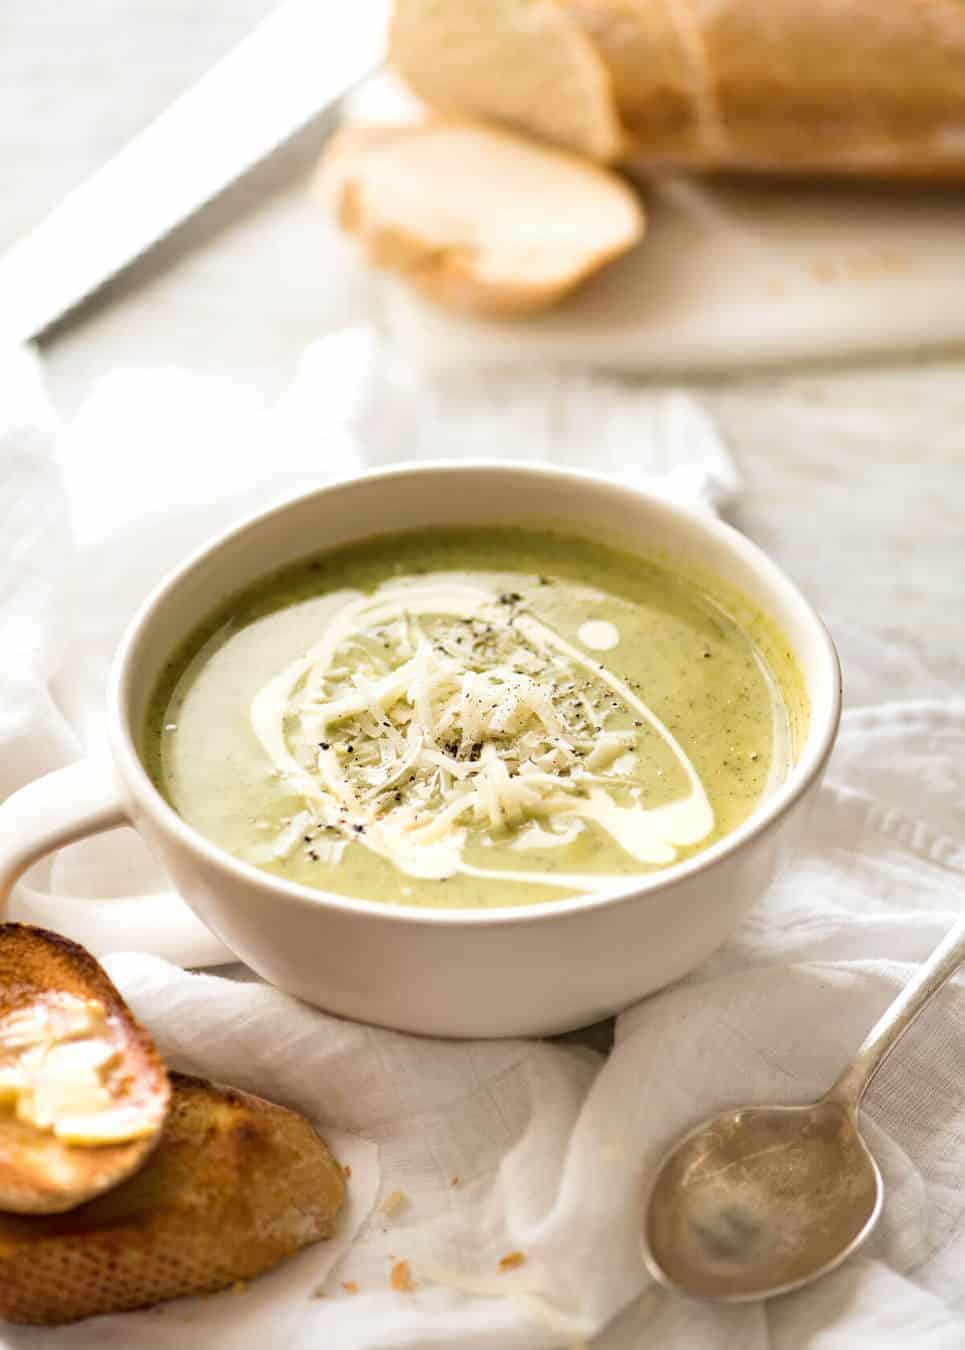 Silky, thick, Healthy Creamy Zucchini Soup. Perfect for dunking in hot crusty bread! www.recipetineats.com